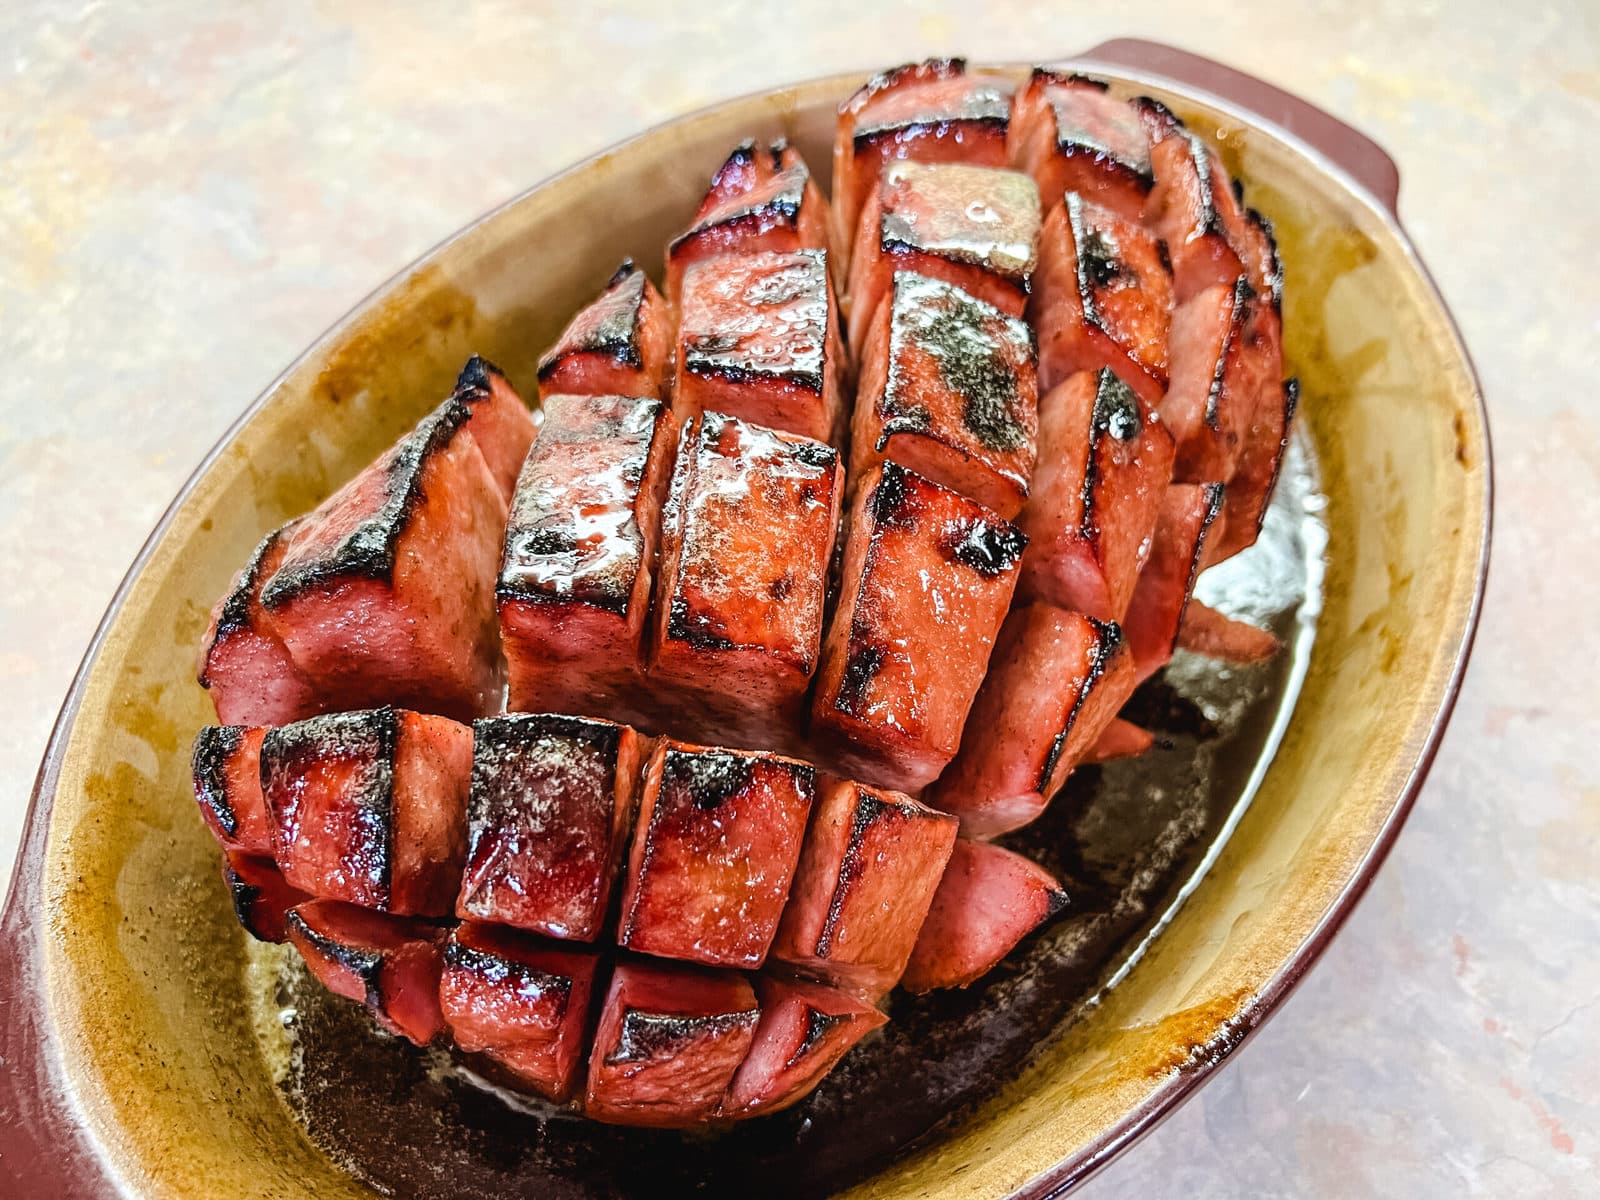 Glazed whole ham that is scored and hot from the oven. 